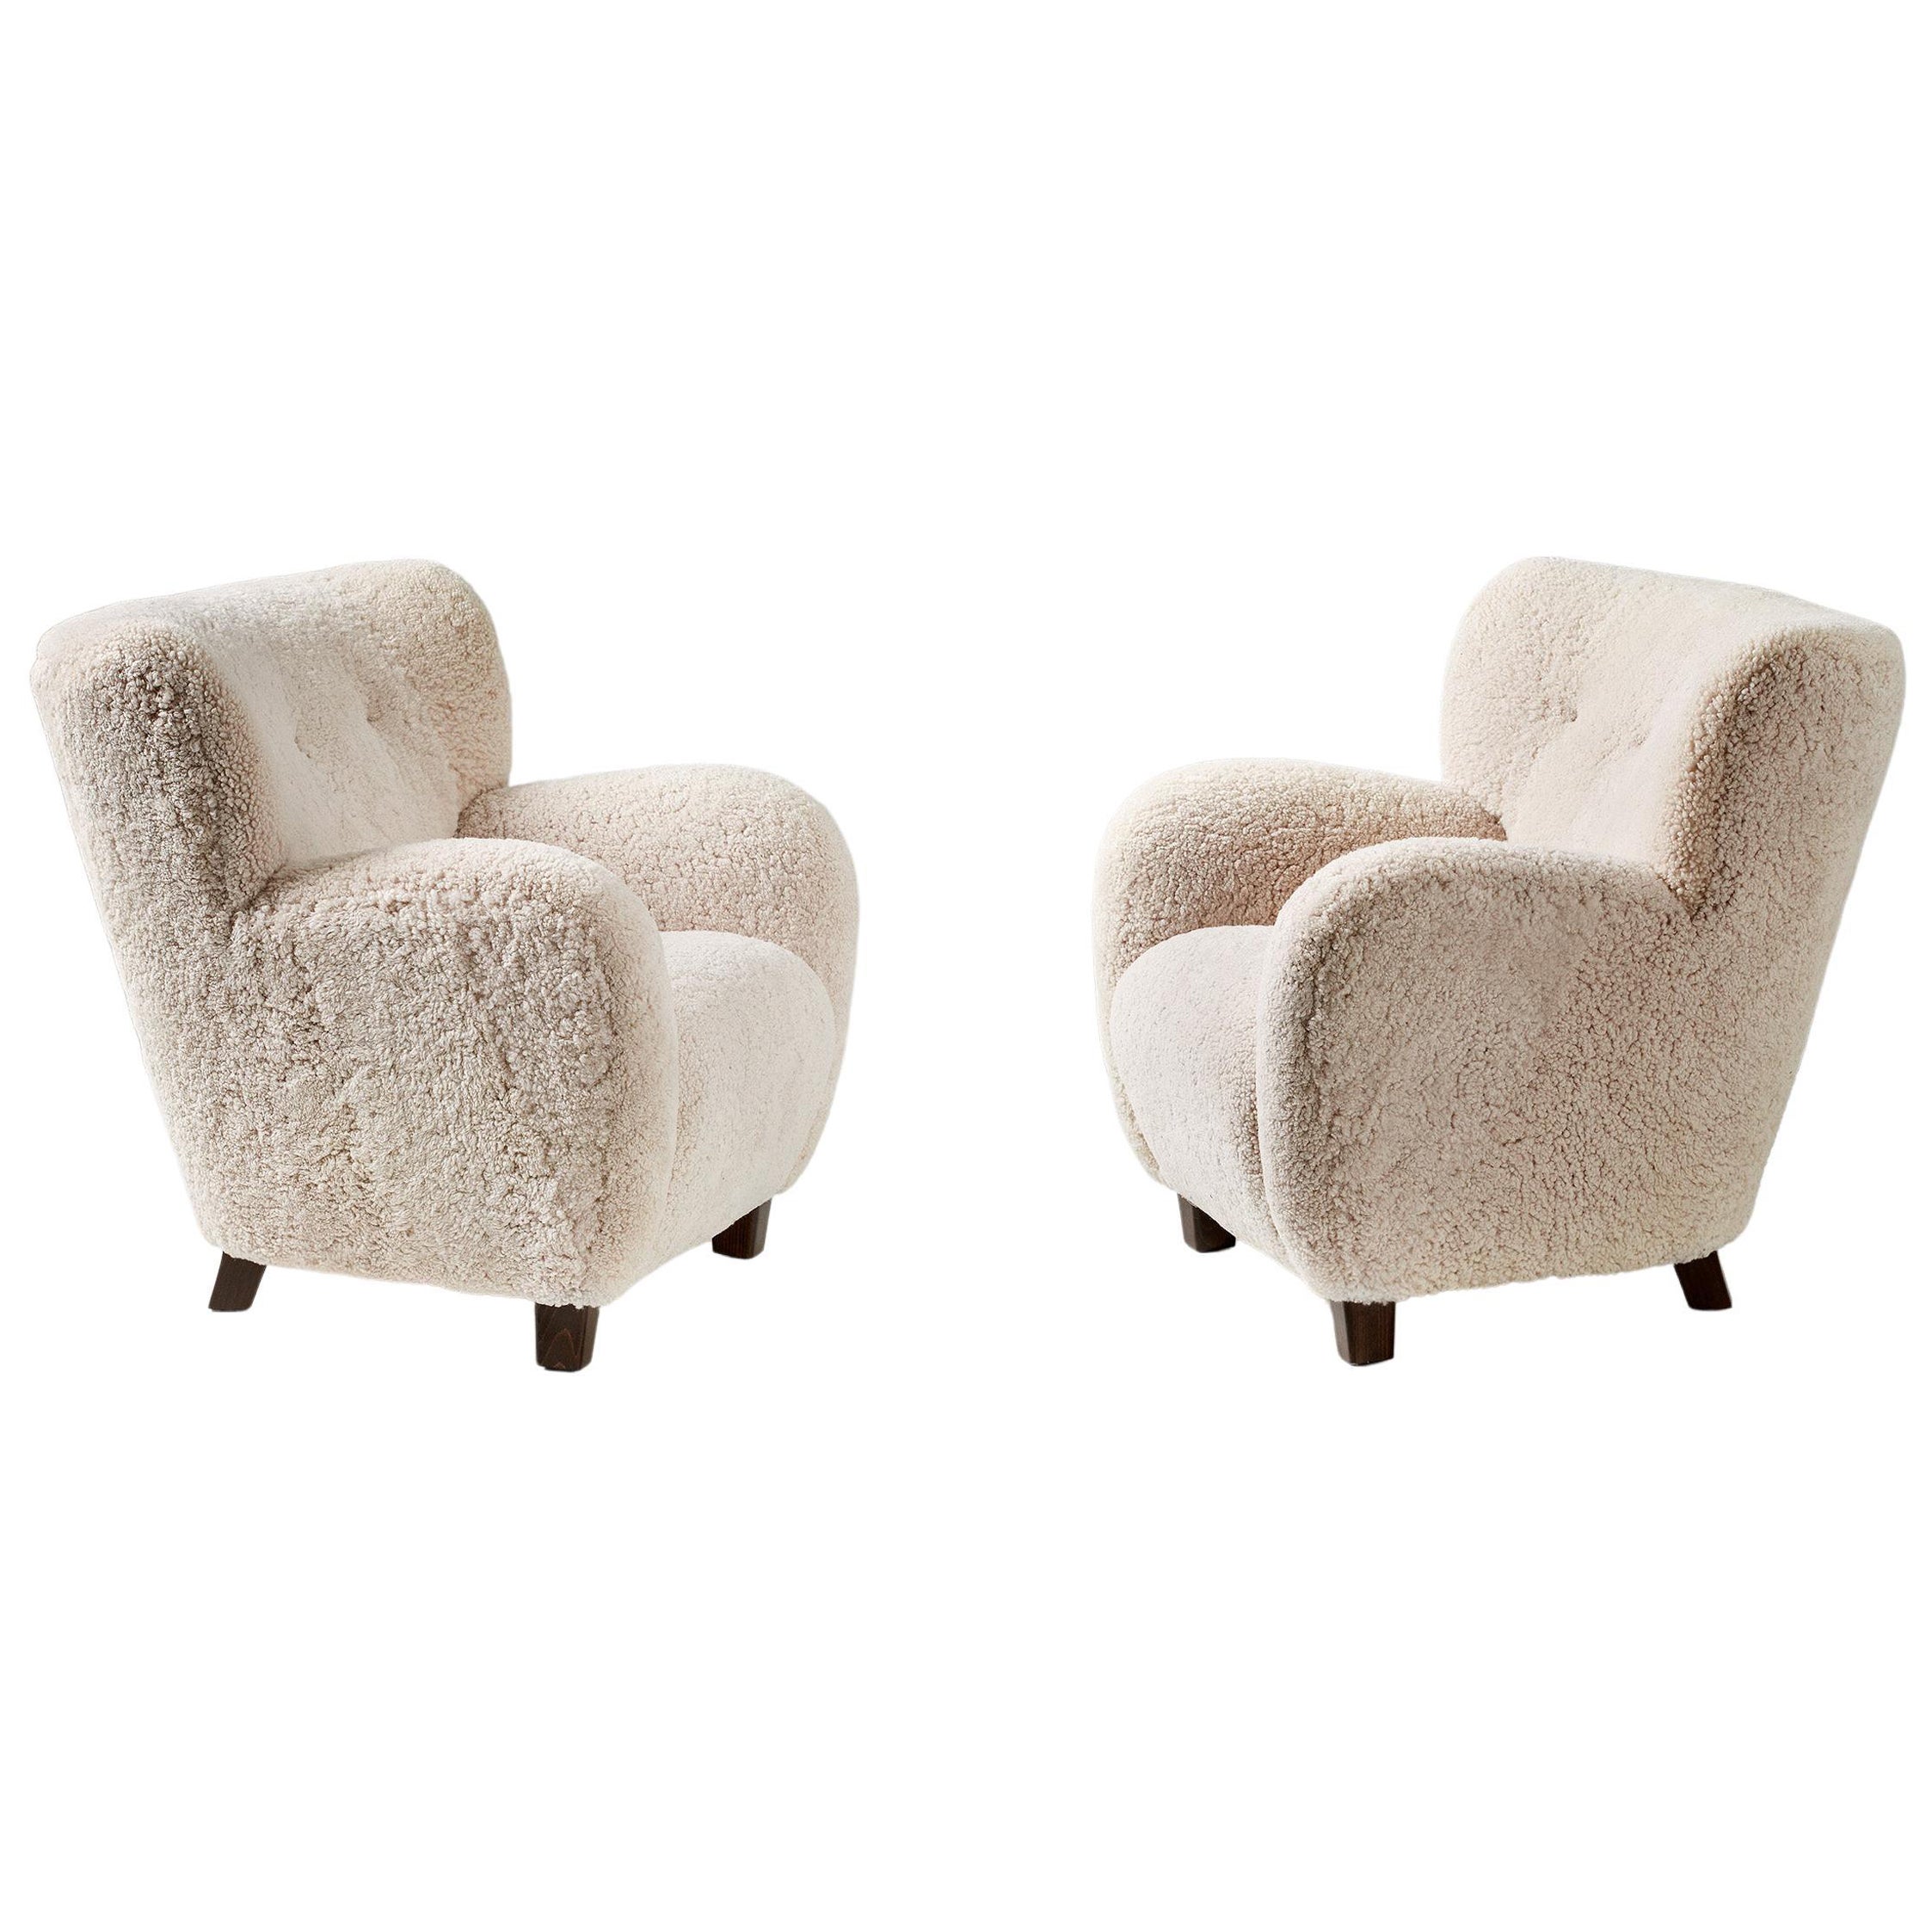 Pair of Custom Made 1940s Style Sheepskin Armchairs For Sale at 1stDibs